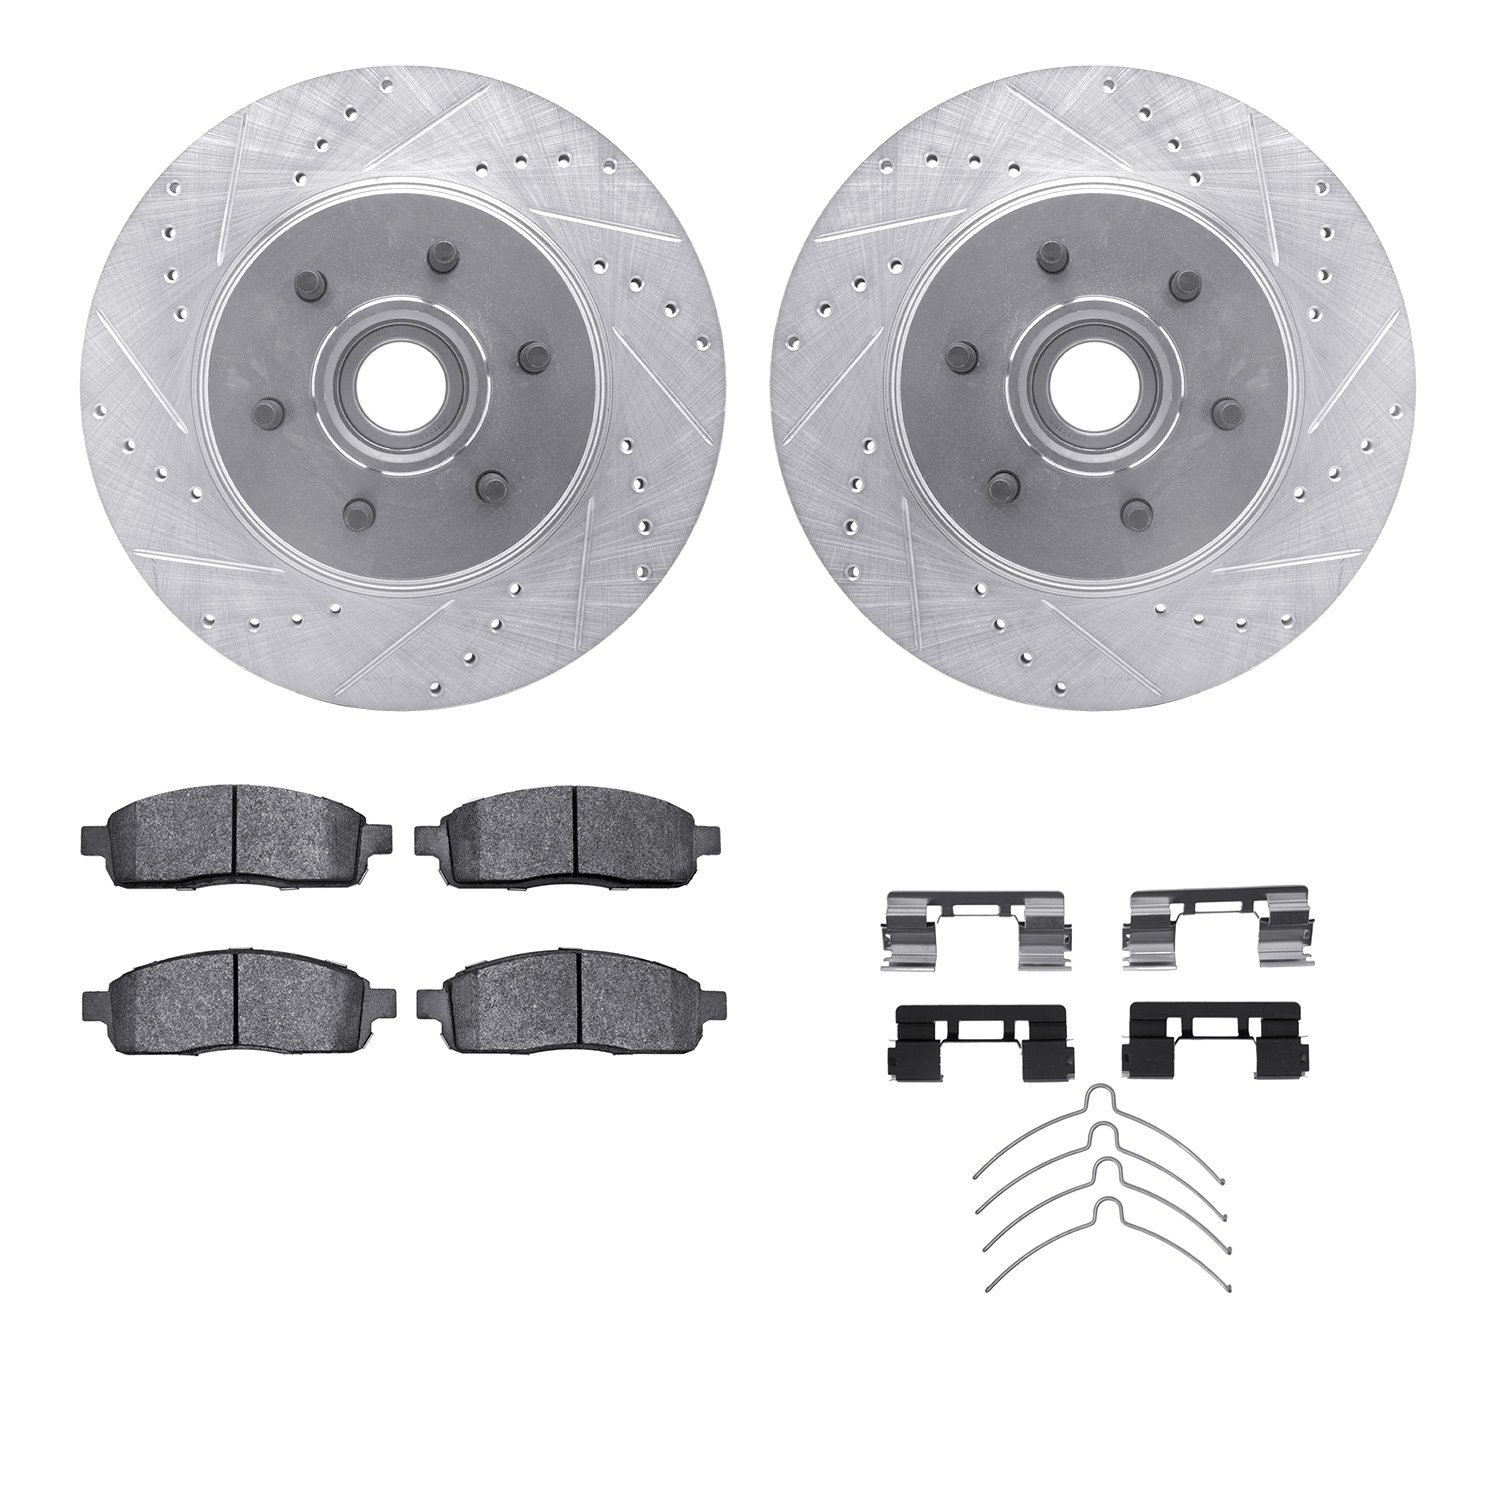 7212-99182 Drilled/Slotted Rotors w/Heavy-Duty Brake Pads Kit & Hardware [Silver], 2004-2008 Ford/Lincoln/Mercury/Mazda, Positio